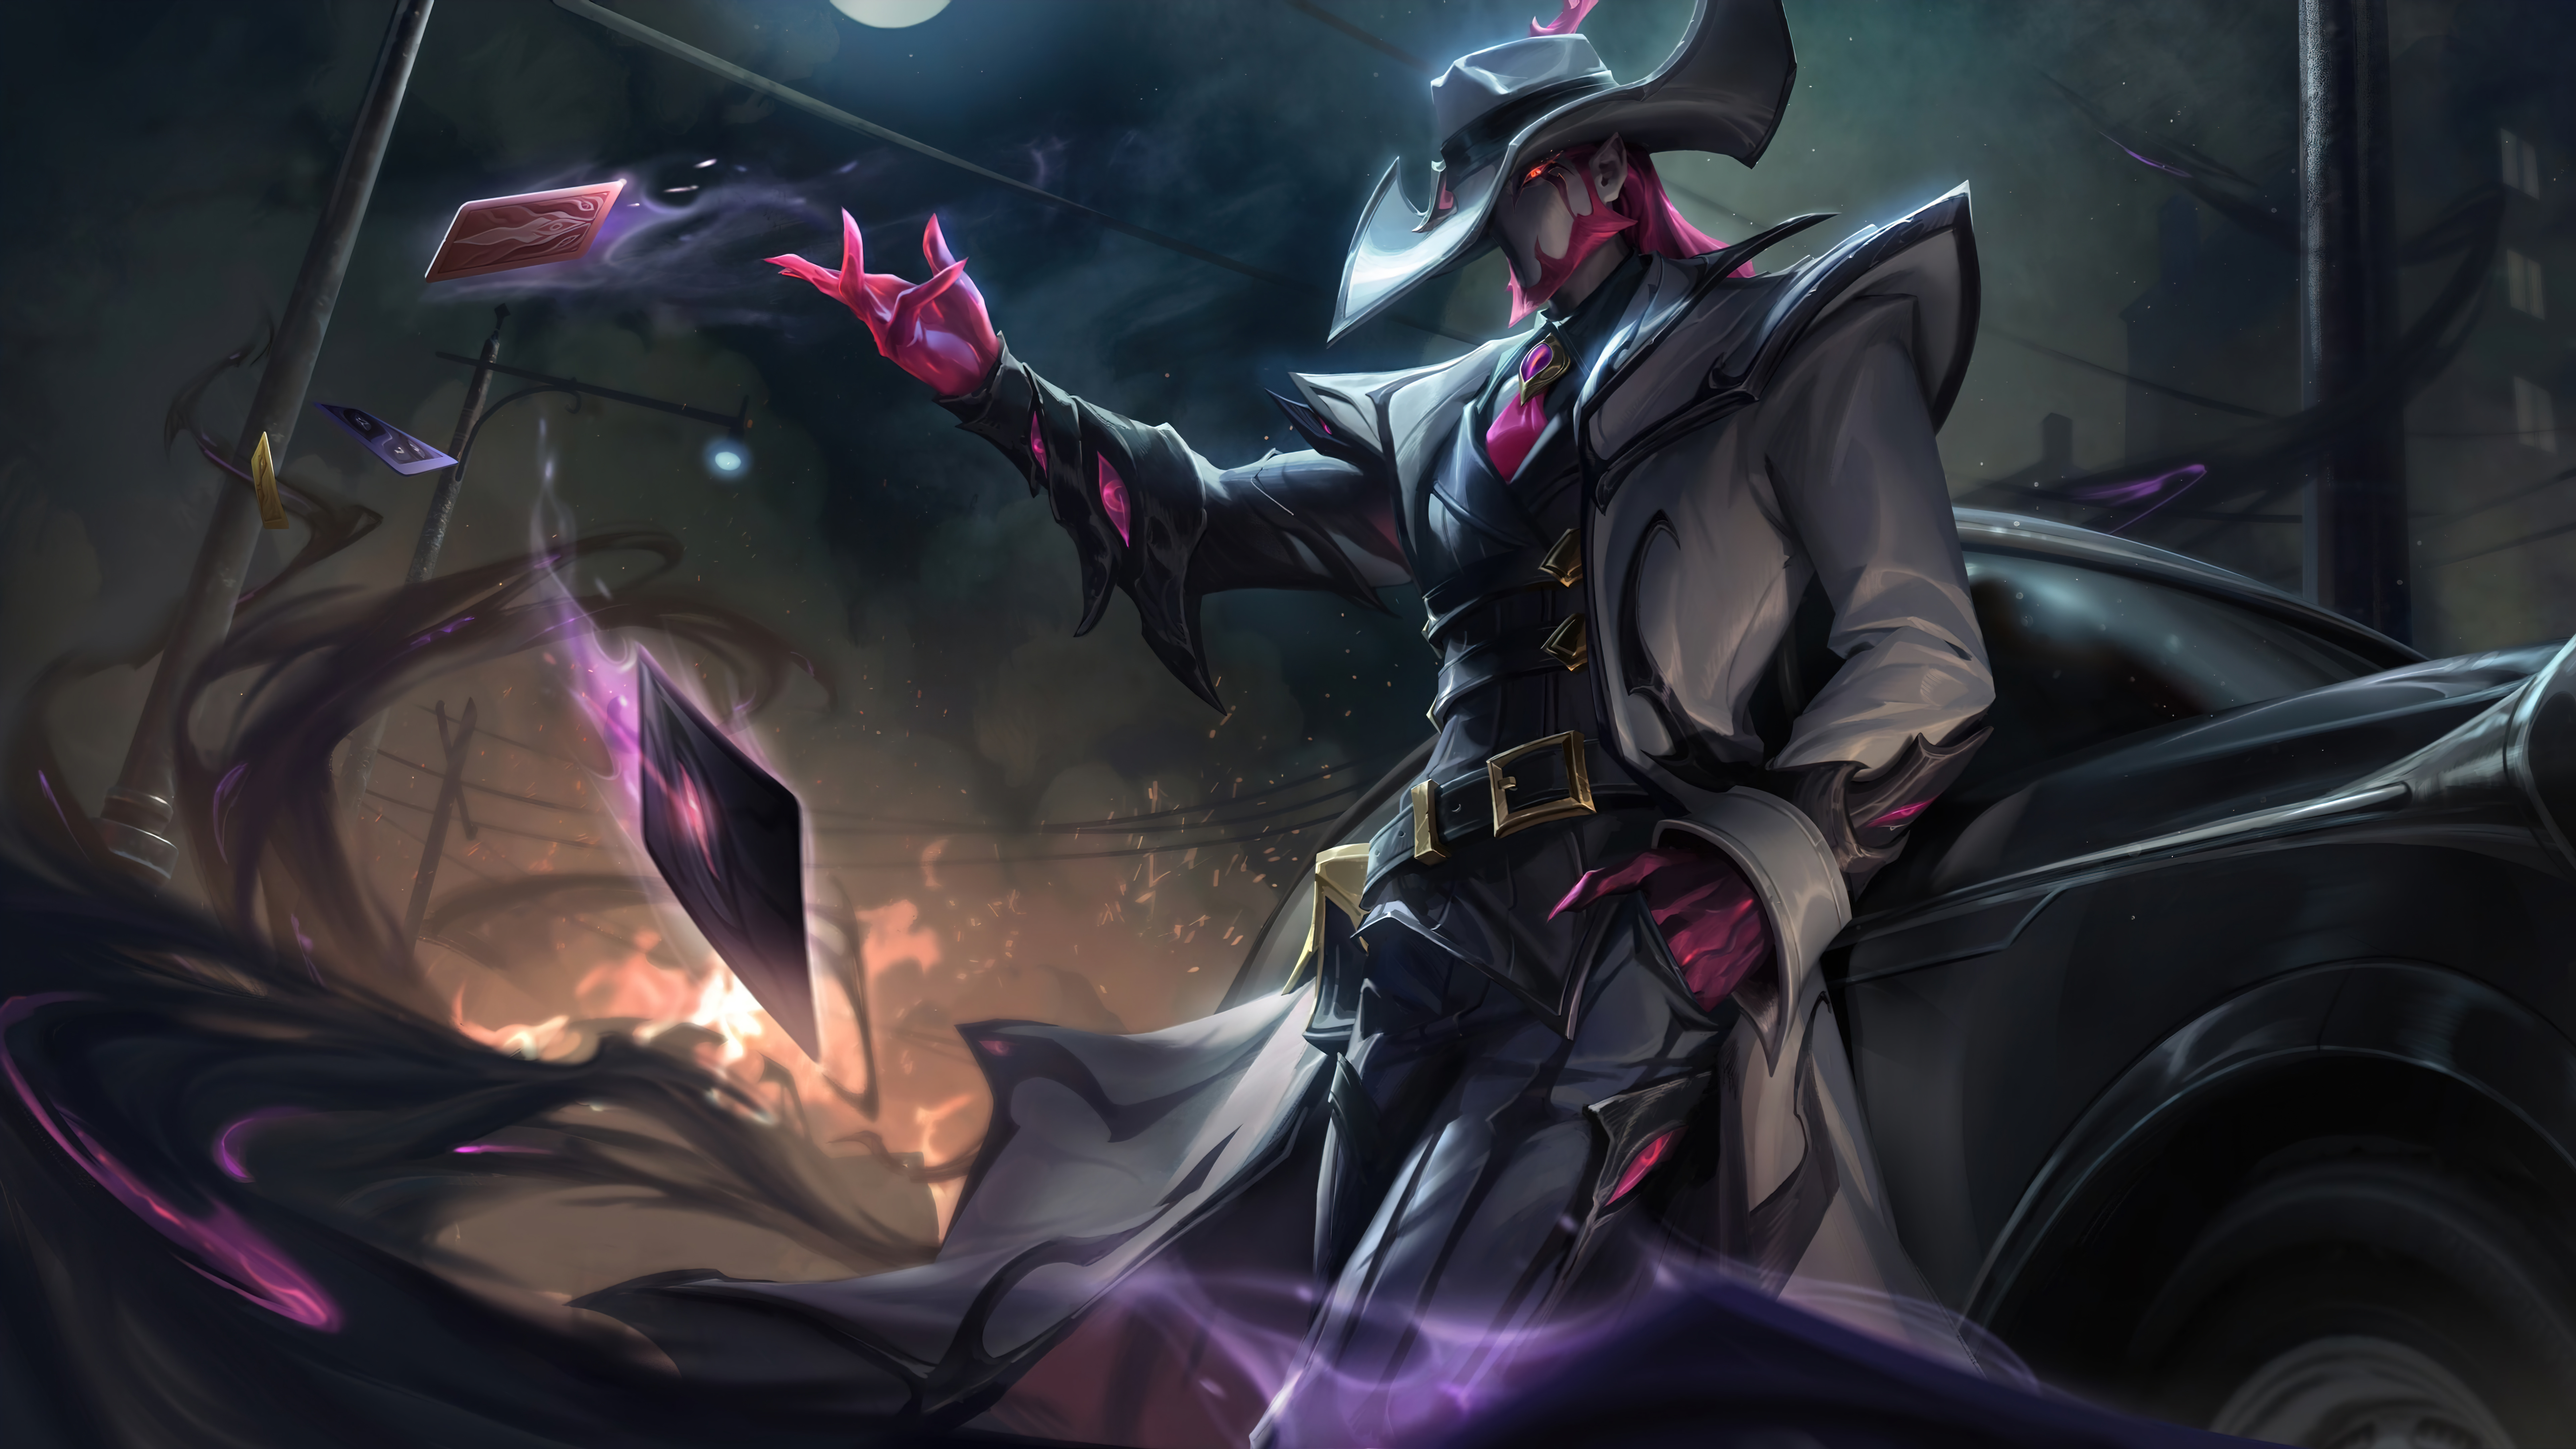 General 7680x4320 Crime City Nightmare city crime Twisted Fate (League of Legends) League of Legends Riot Games dark digital art 4K shadow nightmare GZG video games